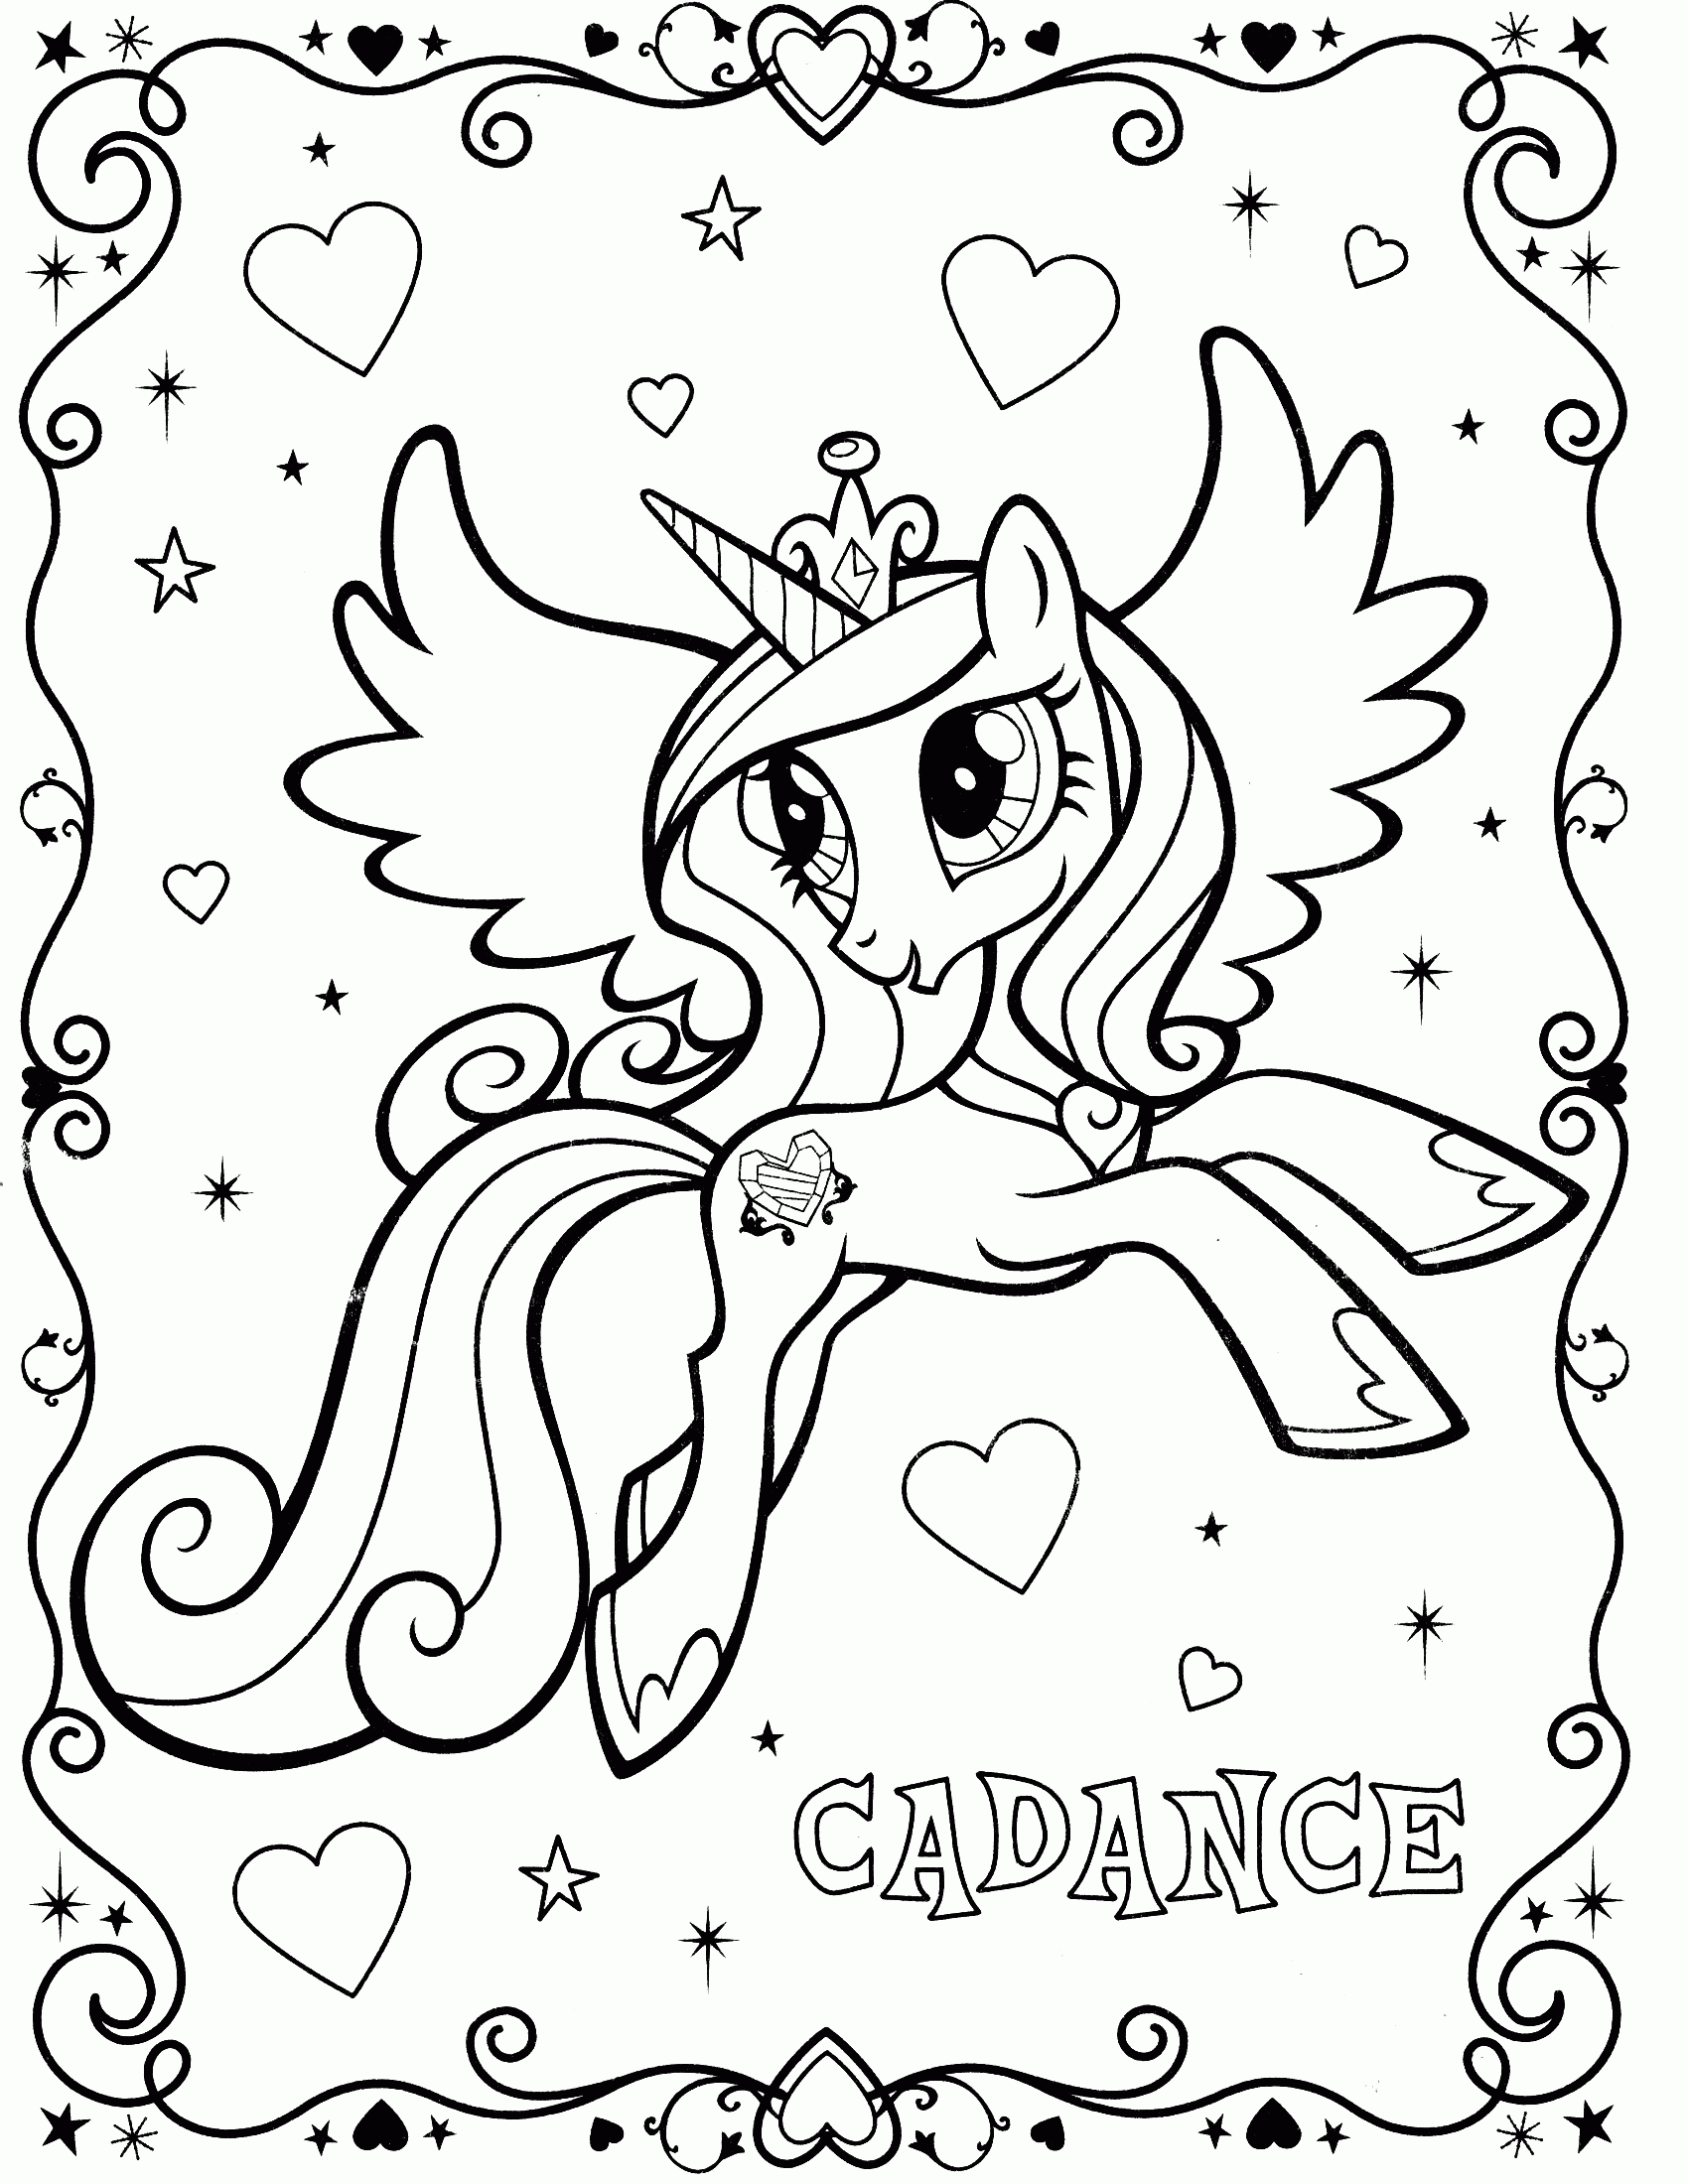 Pony Coloring Pages Princess Cadence Wedding Home Hand Picked Free